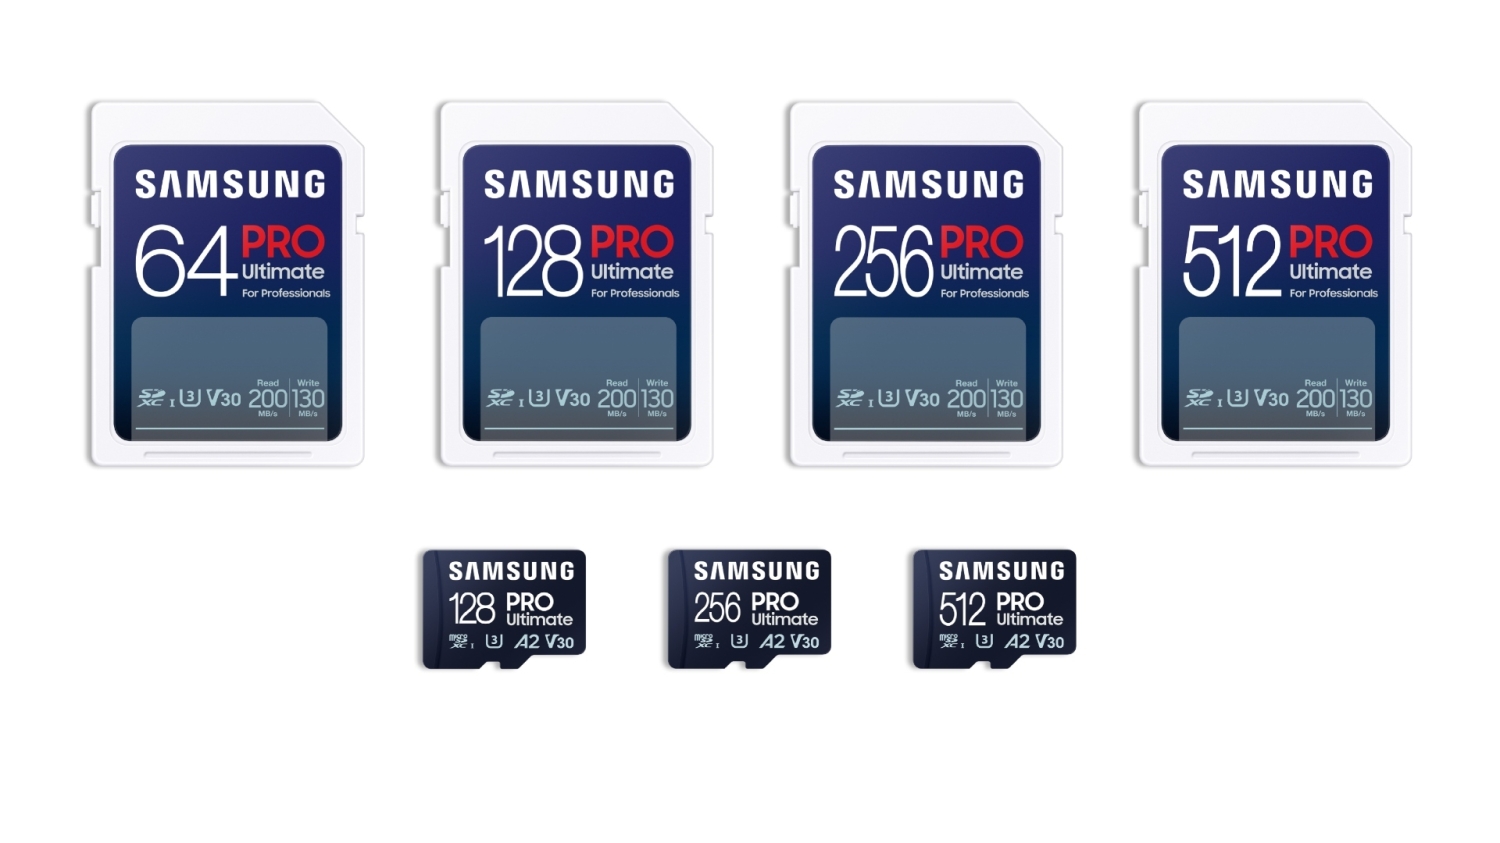 TweakTown Enlarged Image - Samsung's new PRO Ultimate microSD and SD card range, image credit: Samsung.